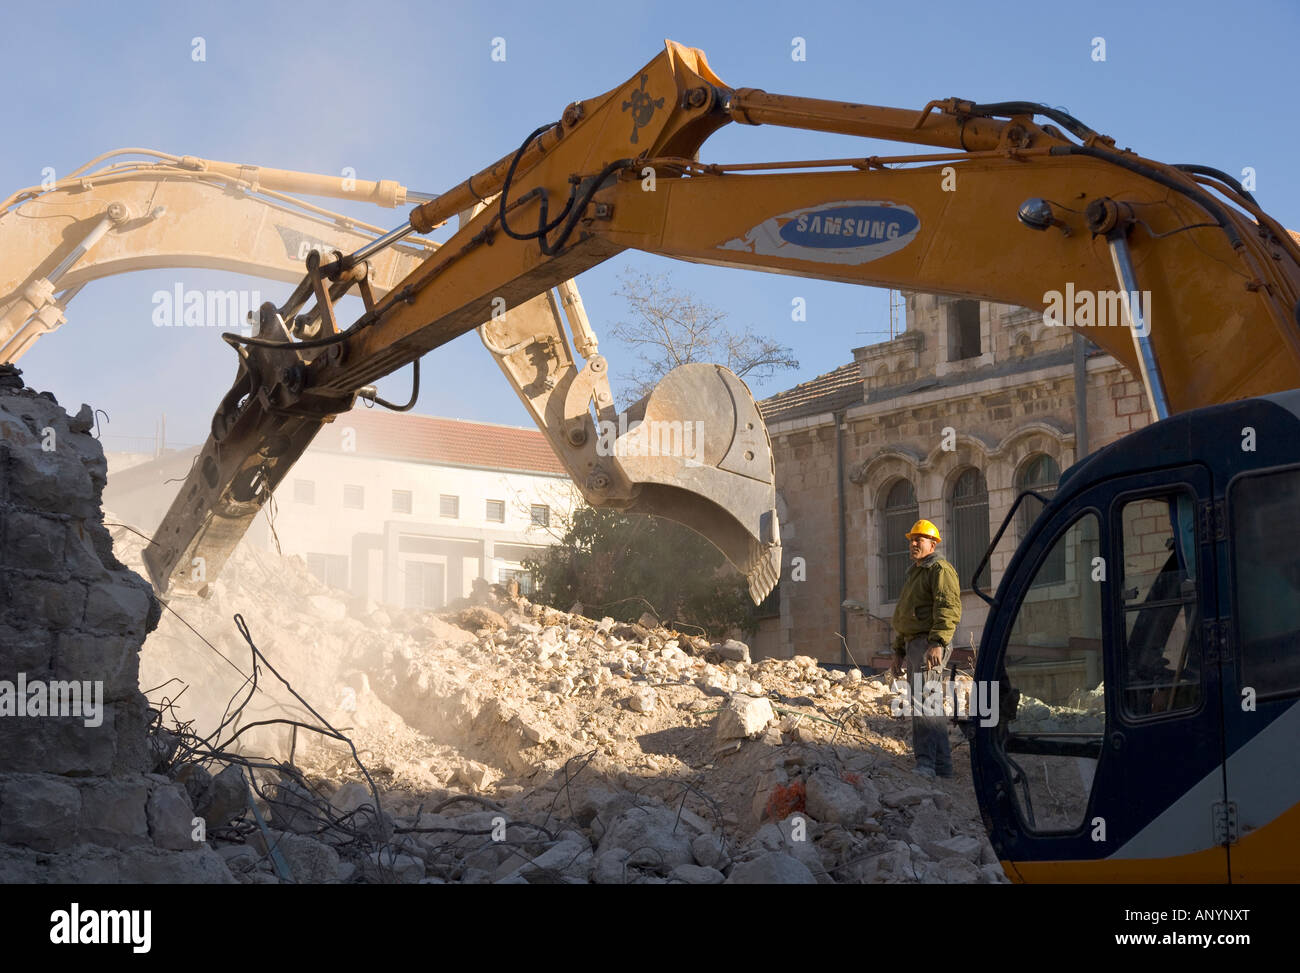 Demolition of old compound at building site near Mamila neighbourhood Stock Photo